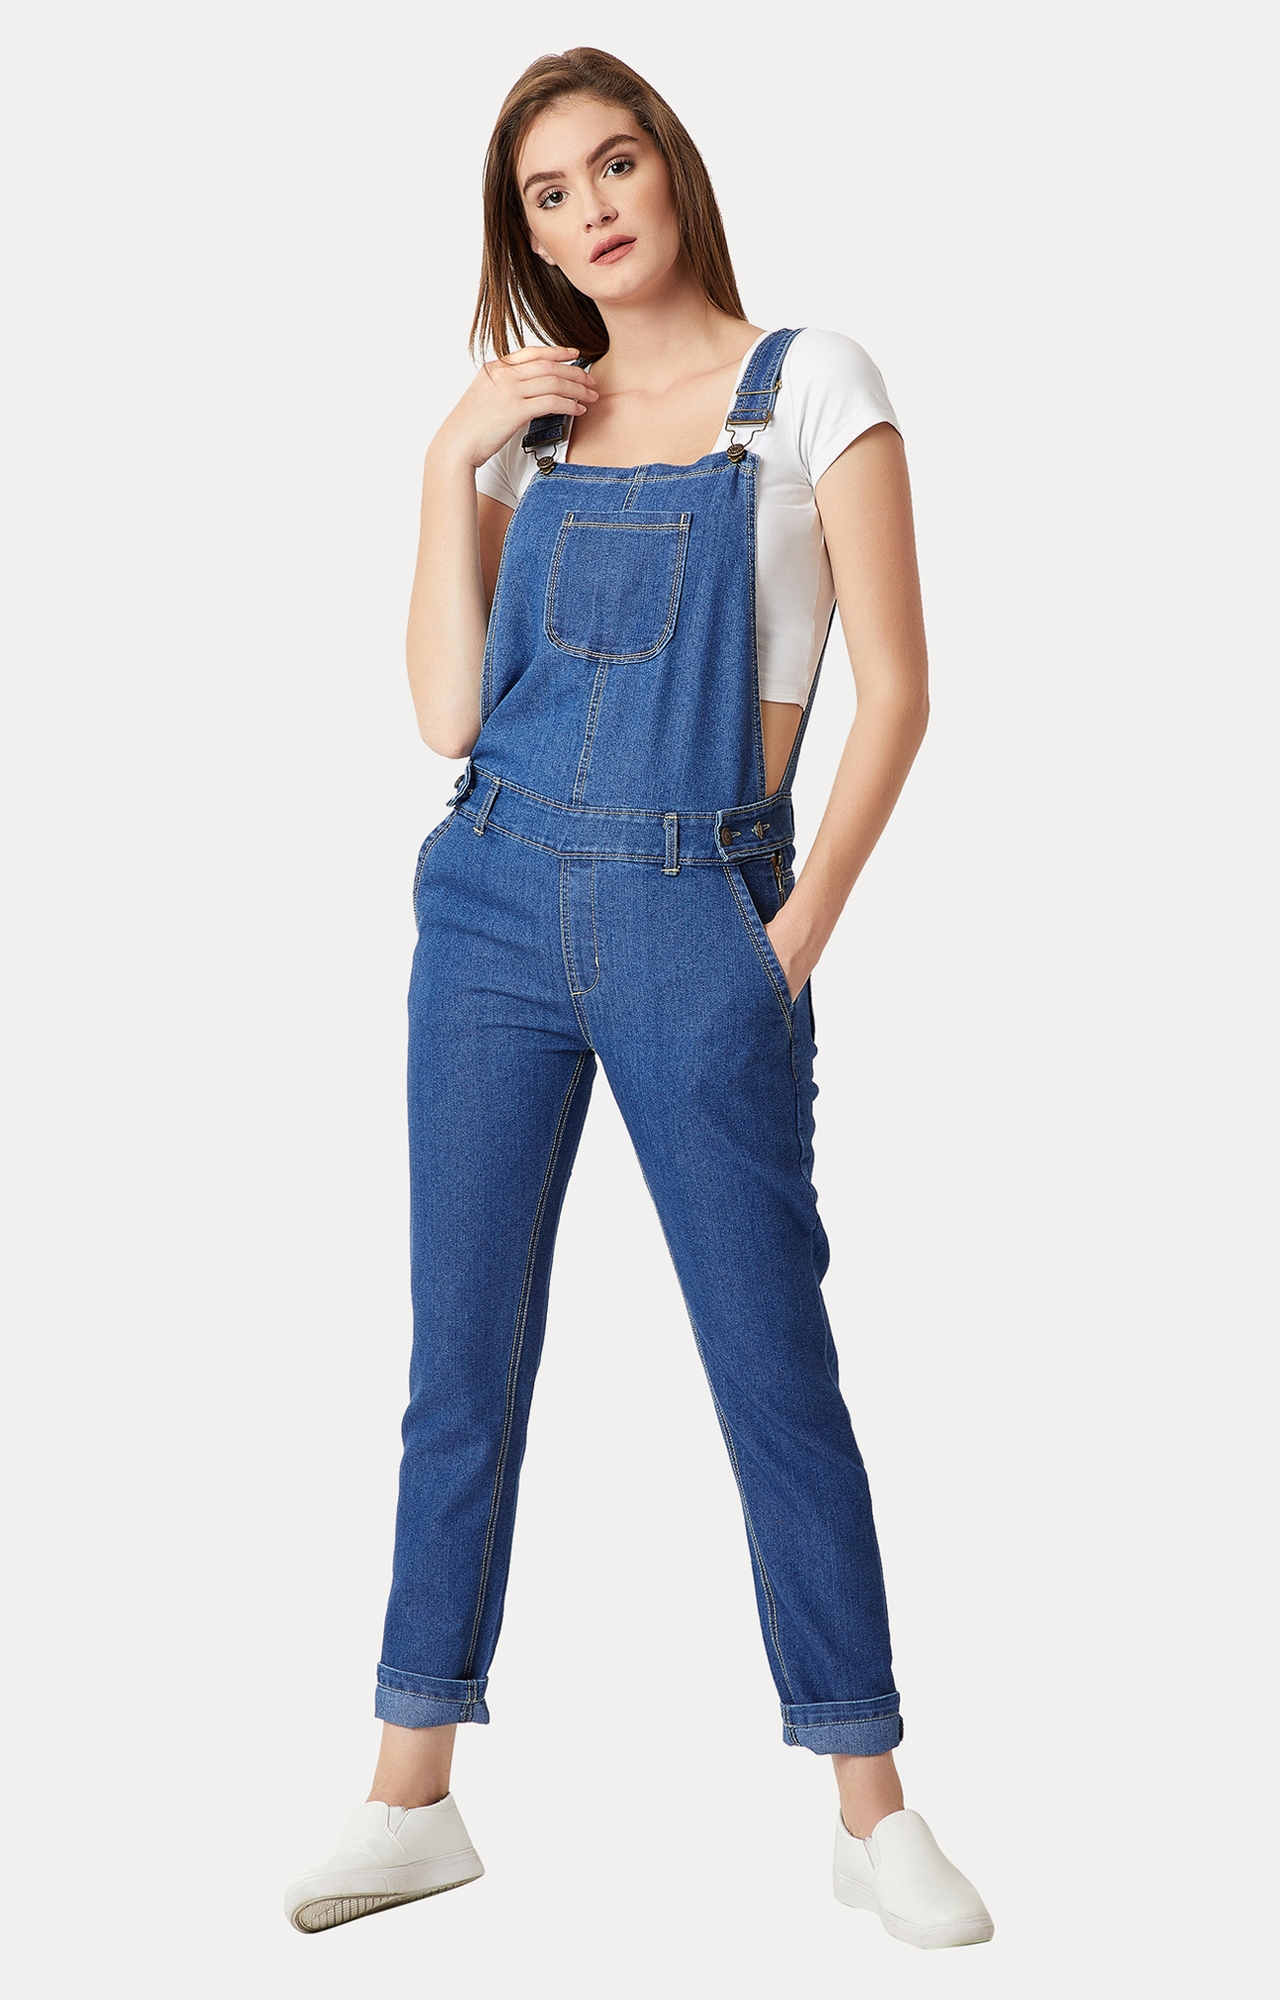 MISS CHASE | Women's Blue Denim SolidCasualwear Dungarees